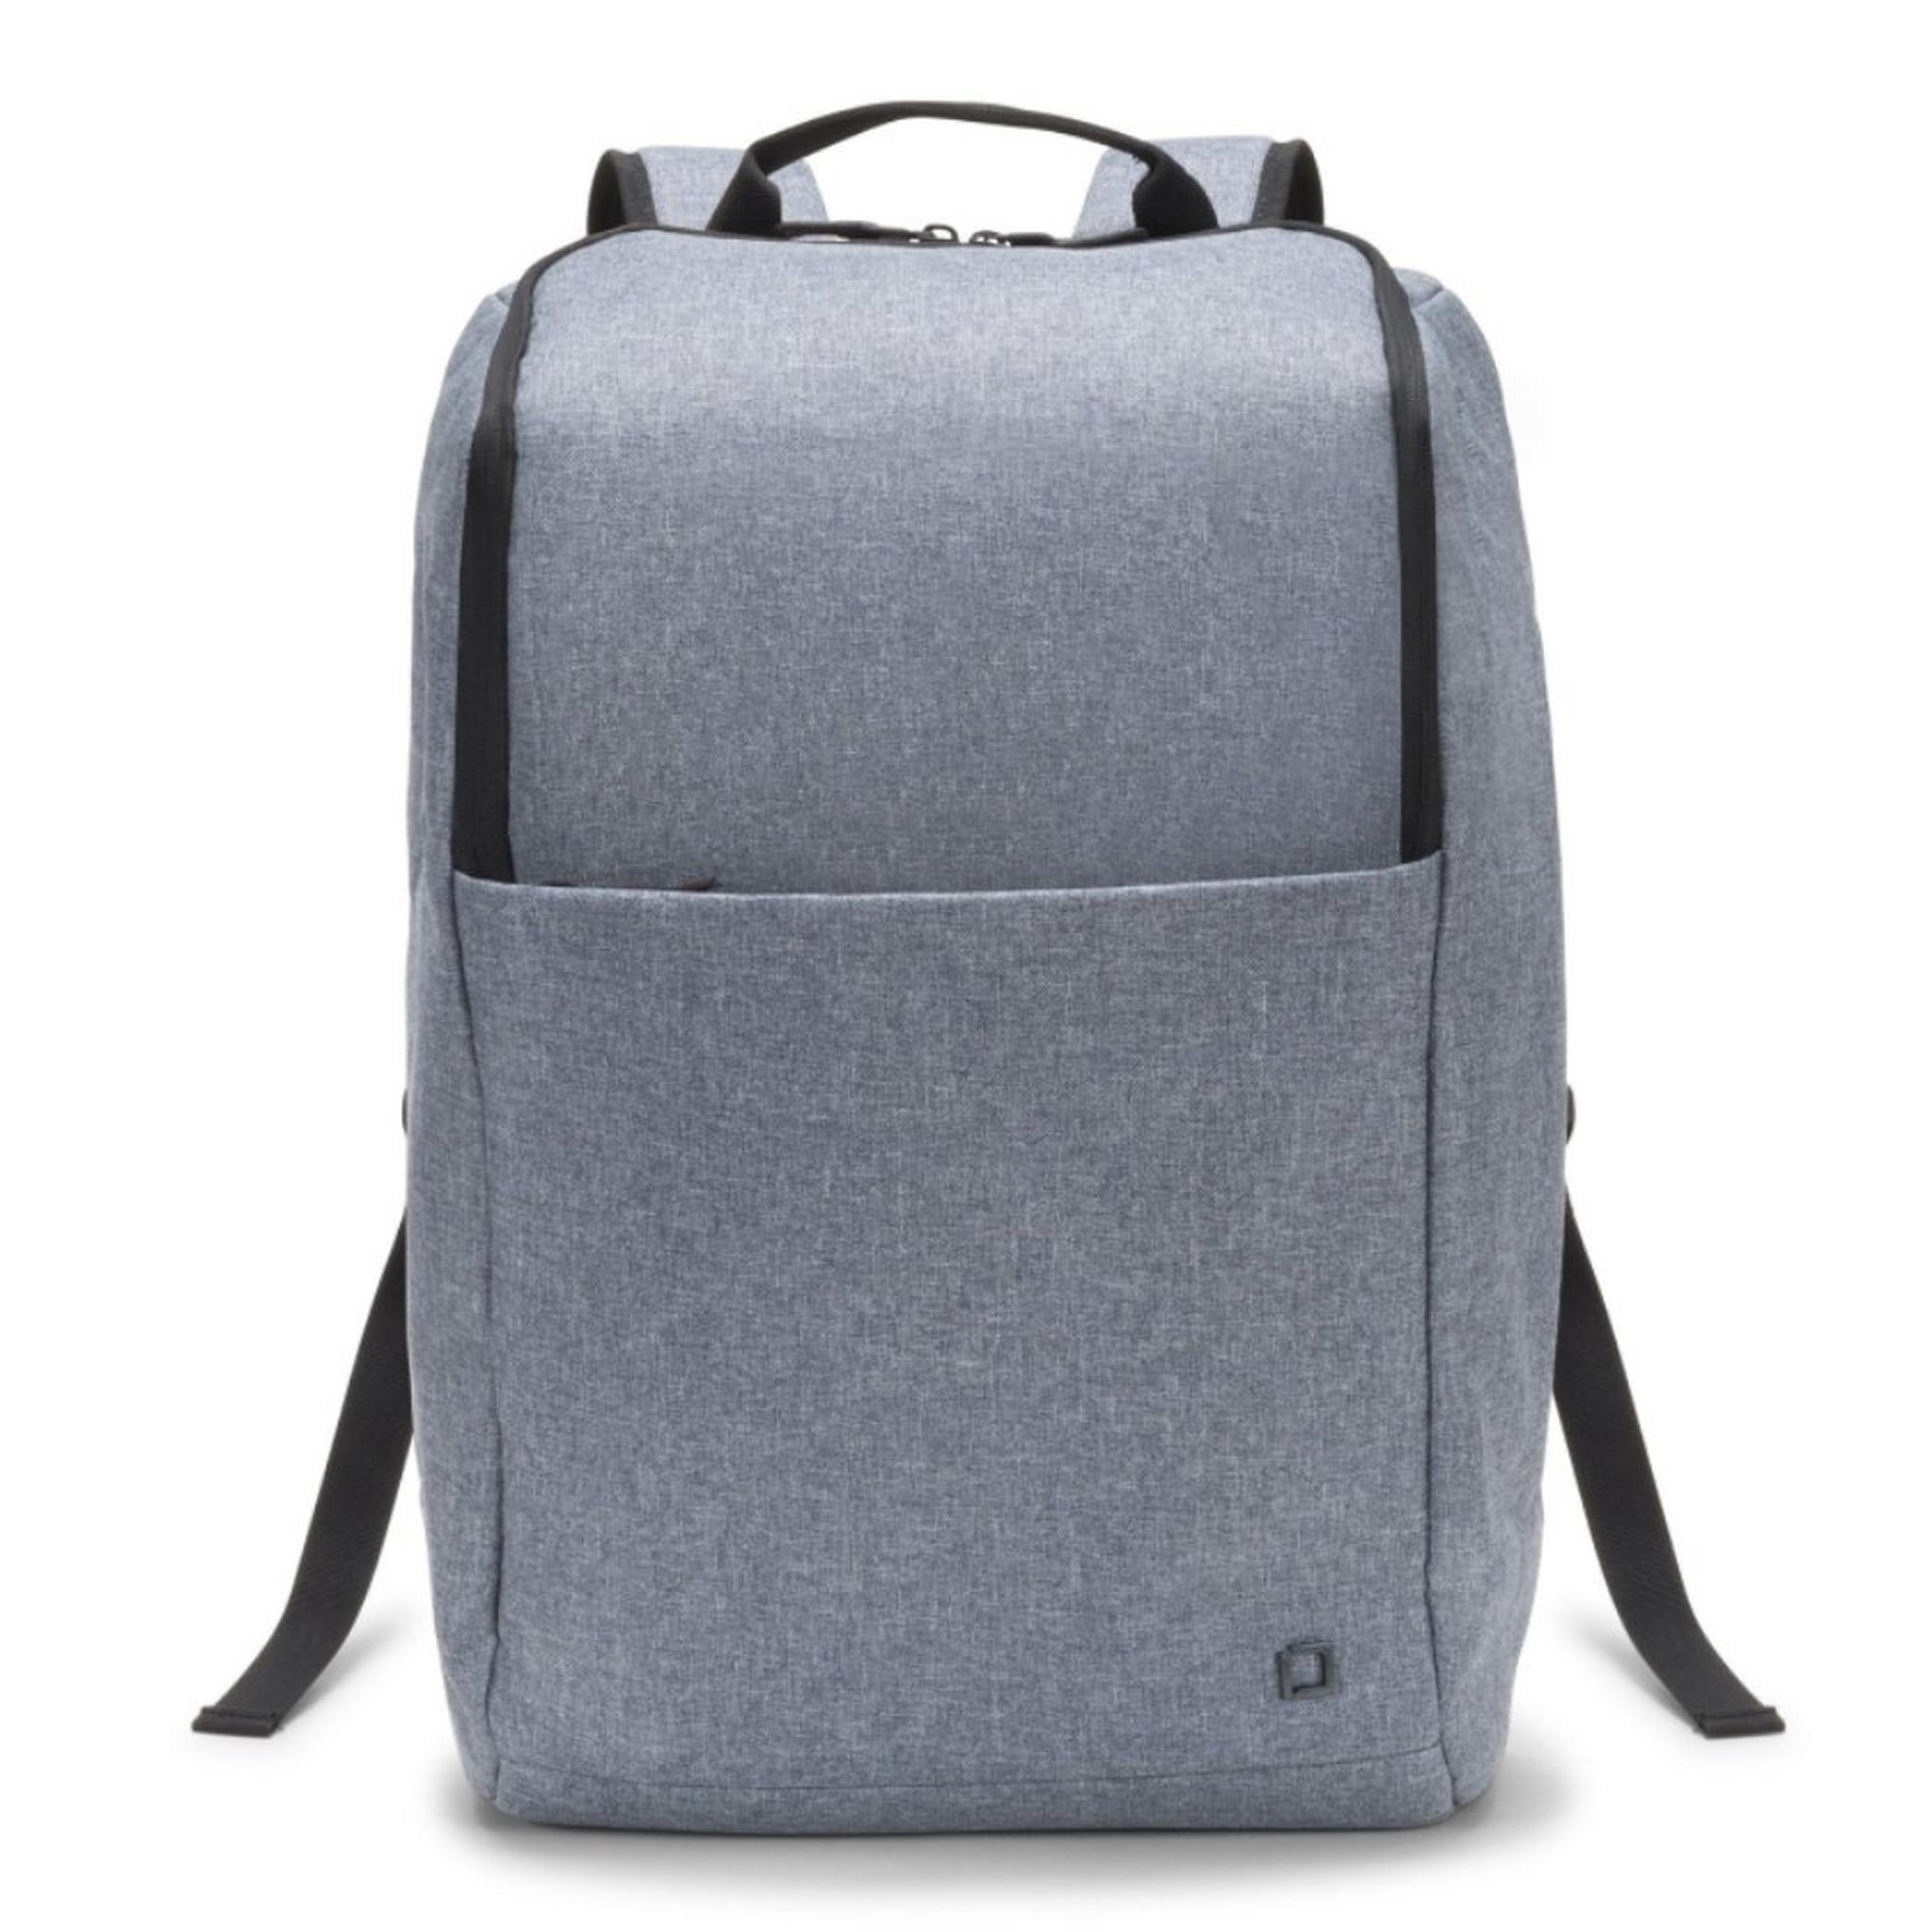 Dicota Eco Motion Backpack for 15.6-inch Laptop - Blue